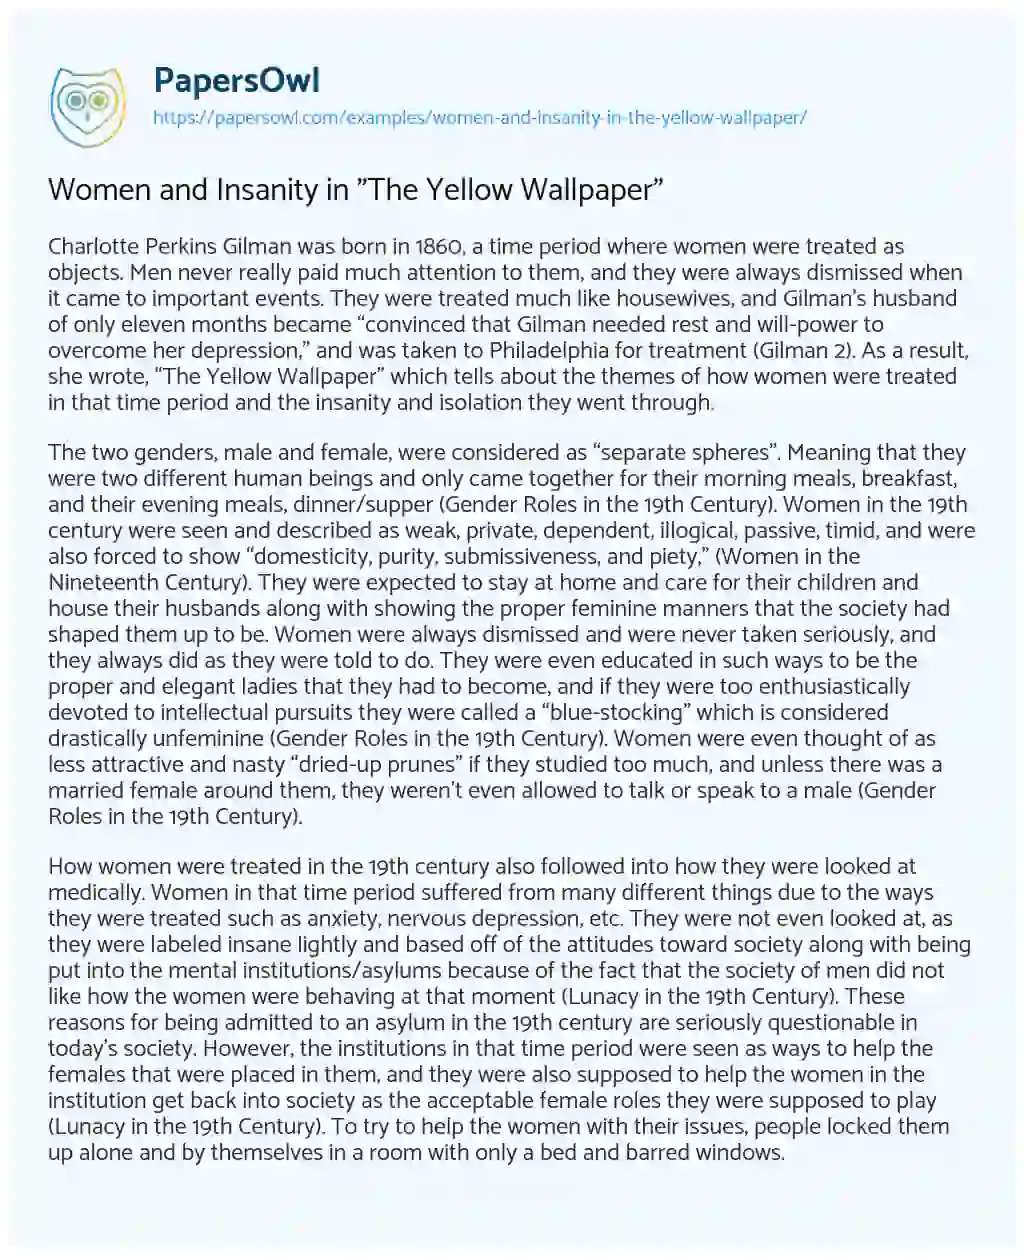 Essay on Women and Insanity in “The Yellow Wallpaper”